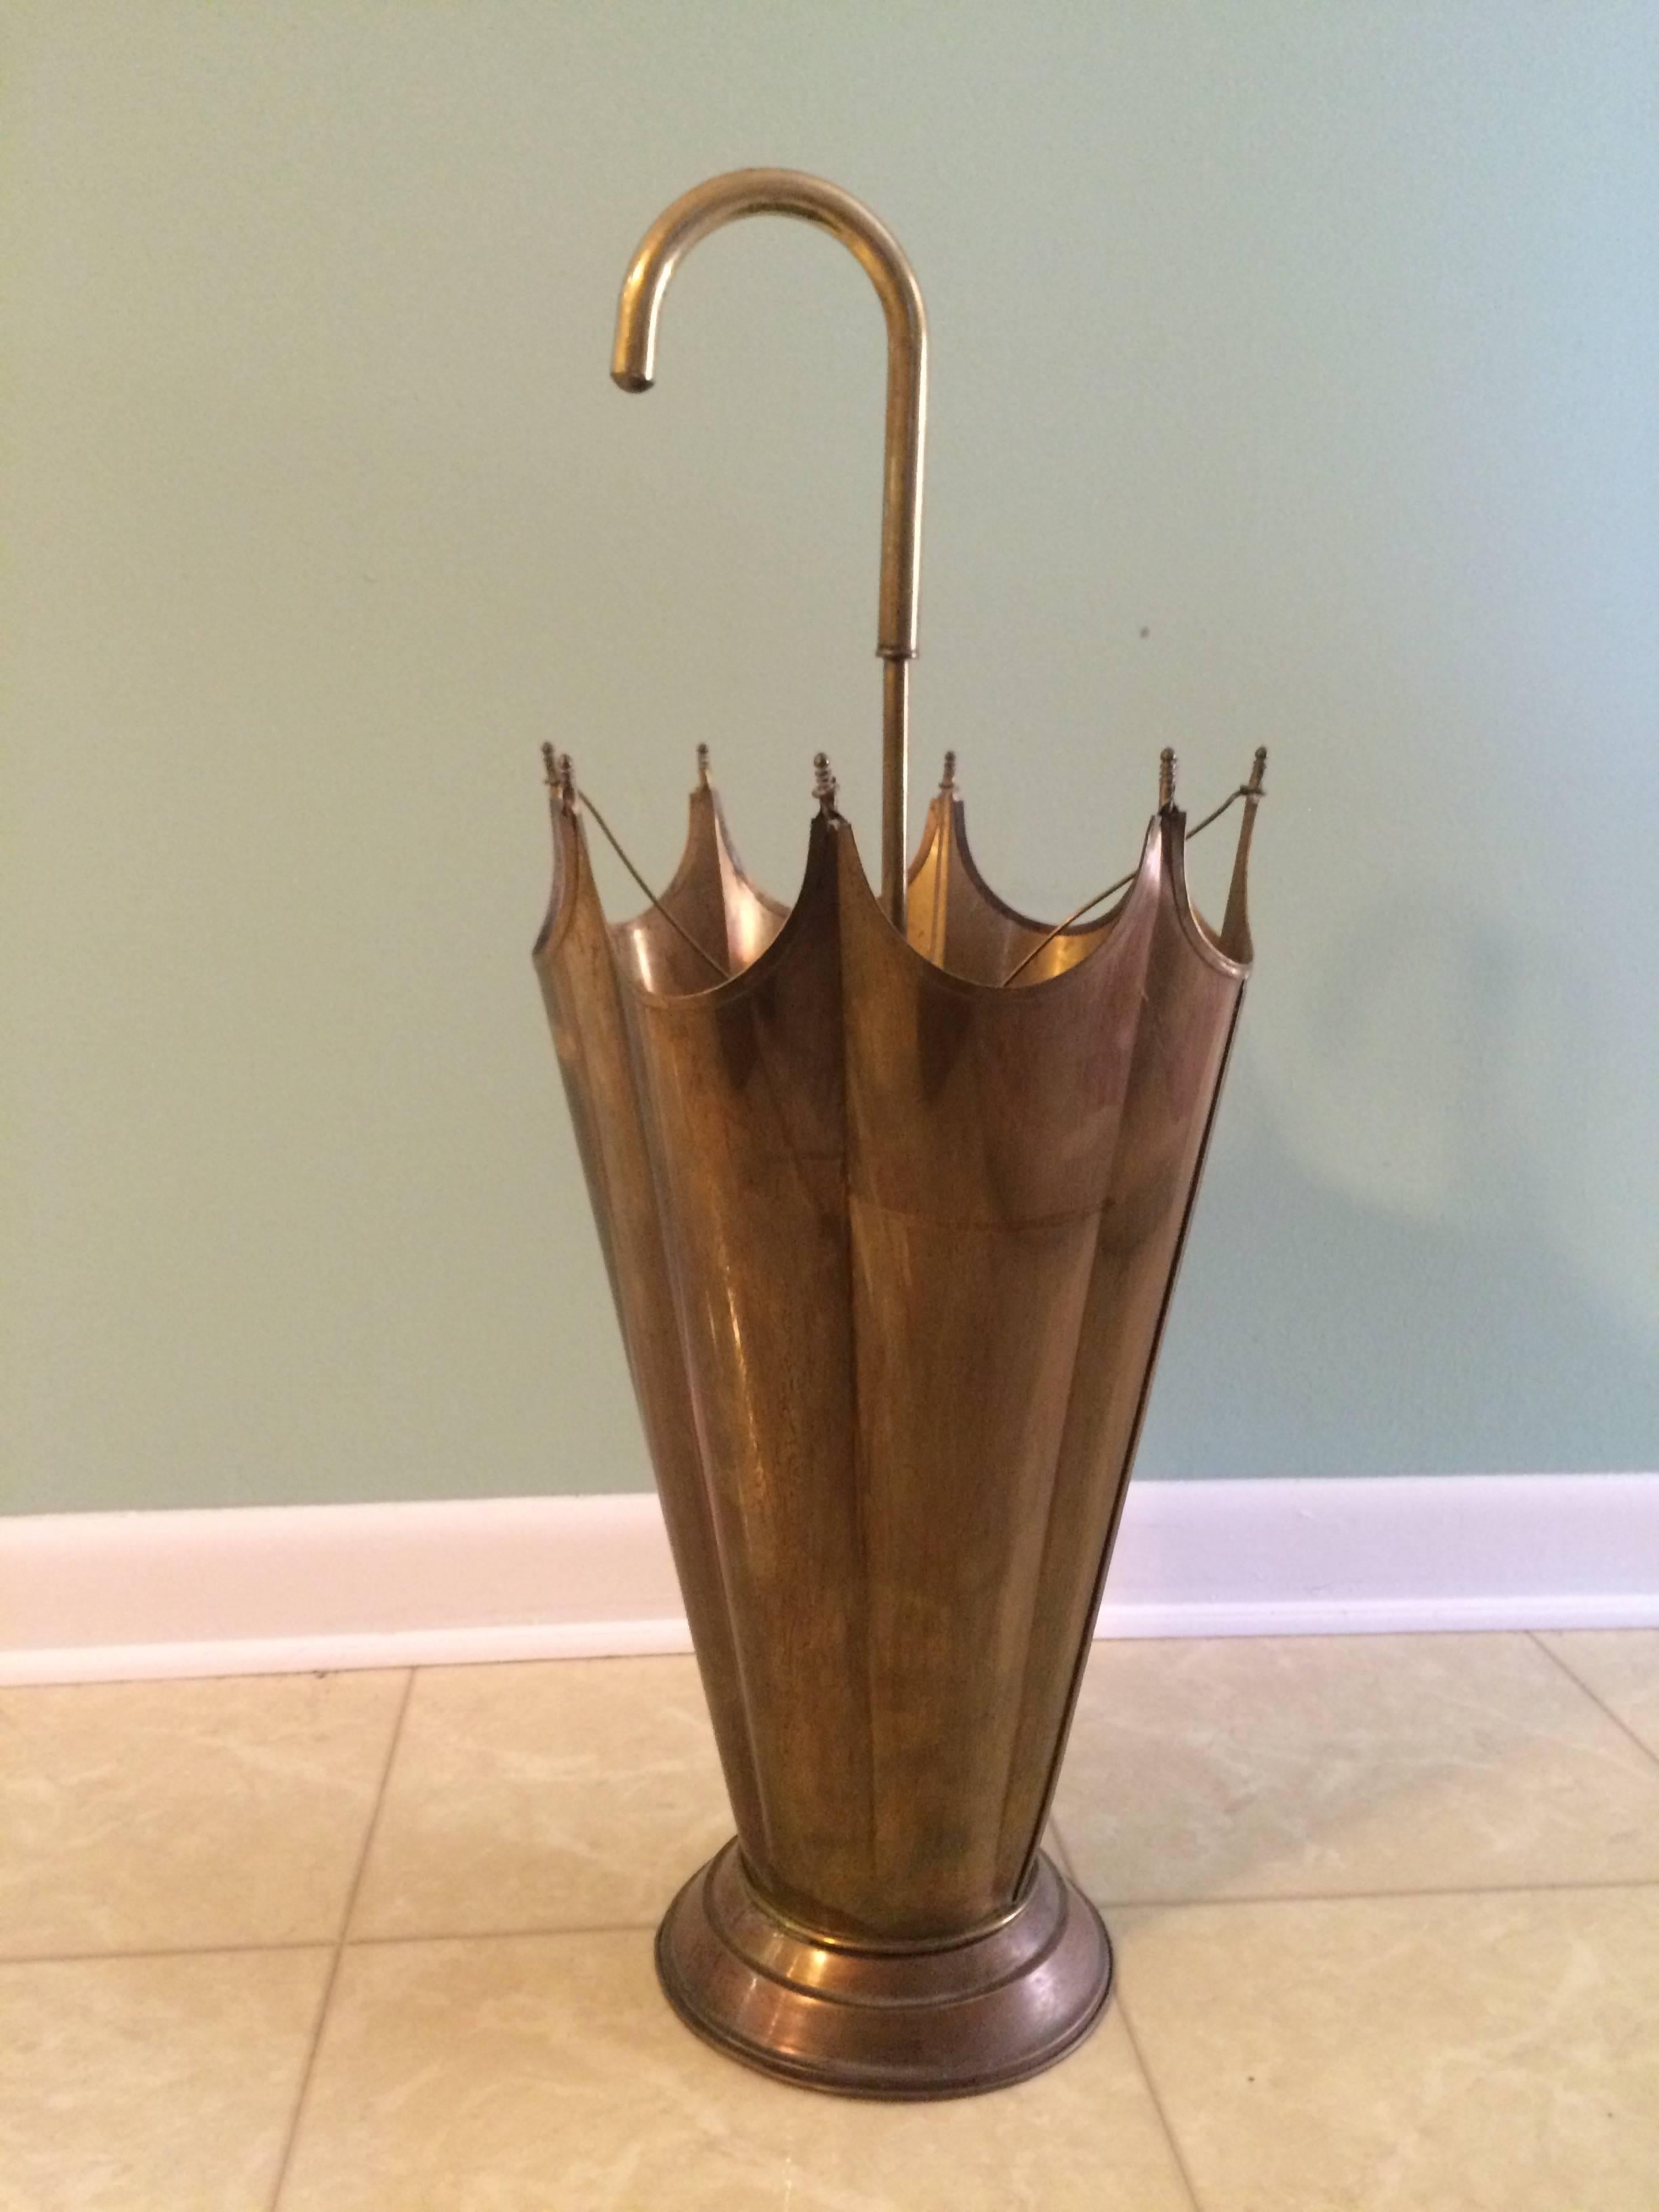 Classic French umbrella shaped umbrella stand. Patinated brass umbrella stand that mocks itself with the Classic shape - a sophisticated, conversation piece that holds the same. Great for any entry. Mary Poppins might be jealous.